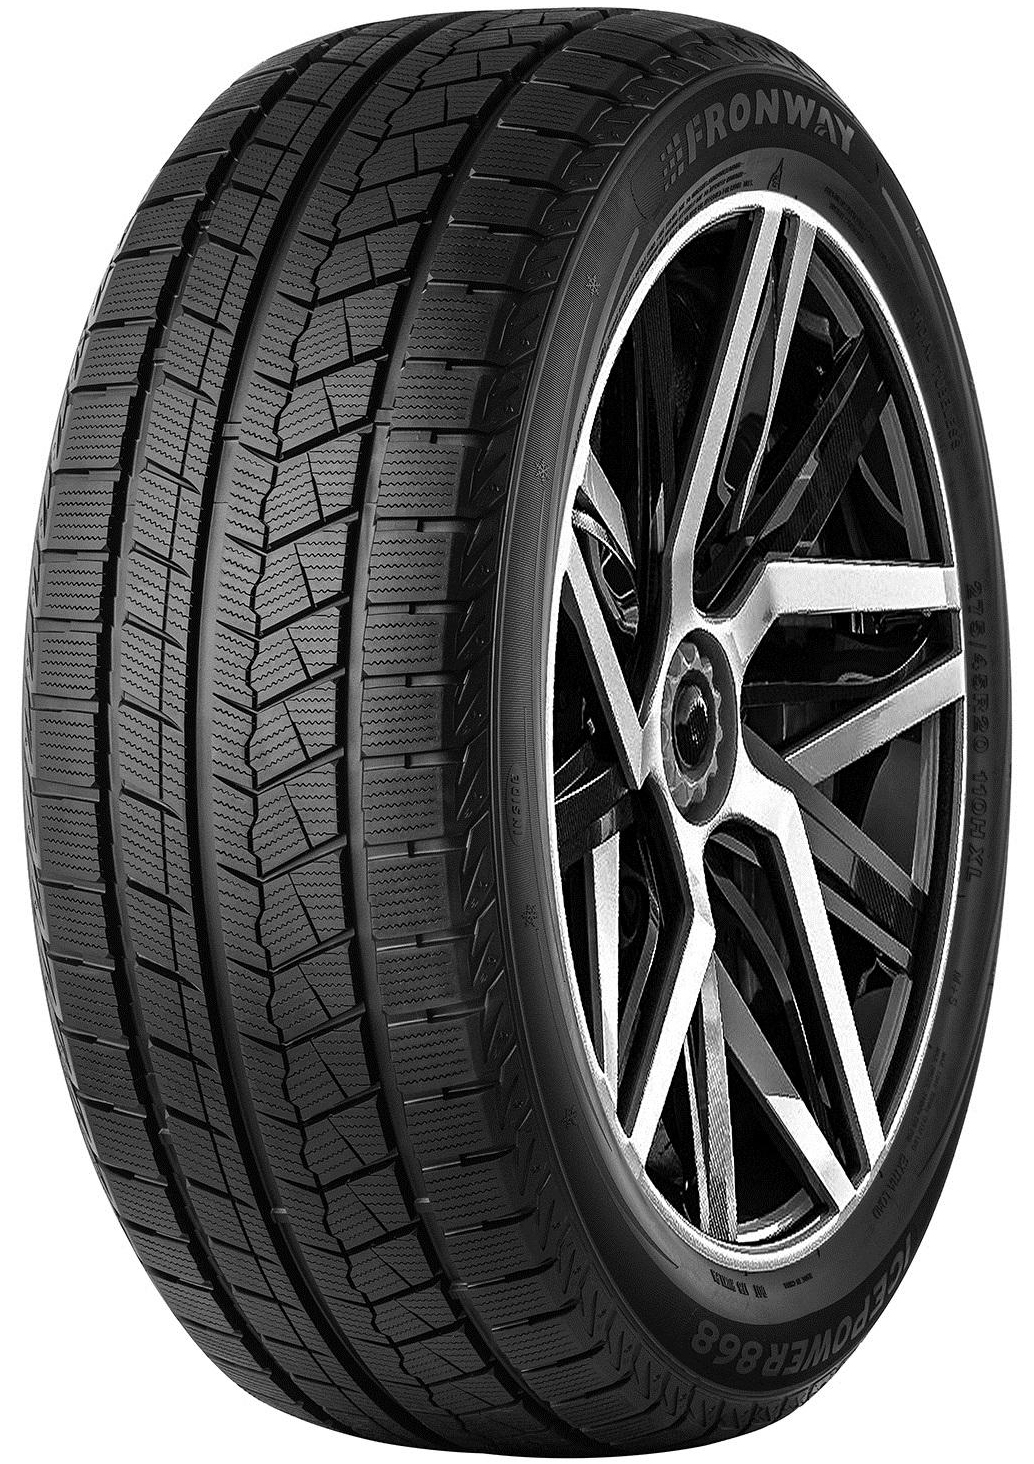    Fronway Icepower 868 245/45 R19 